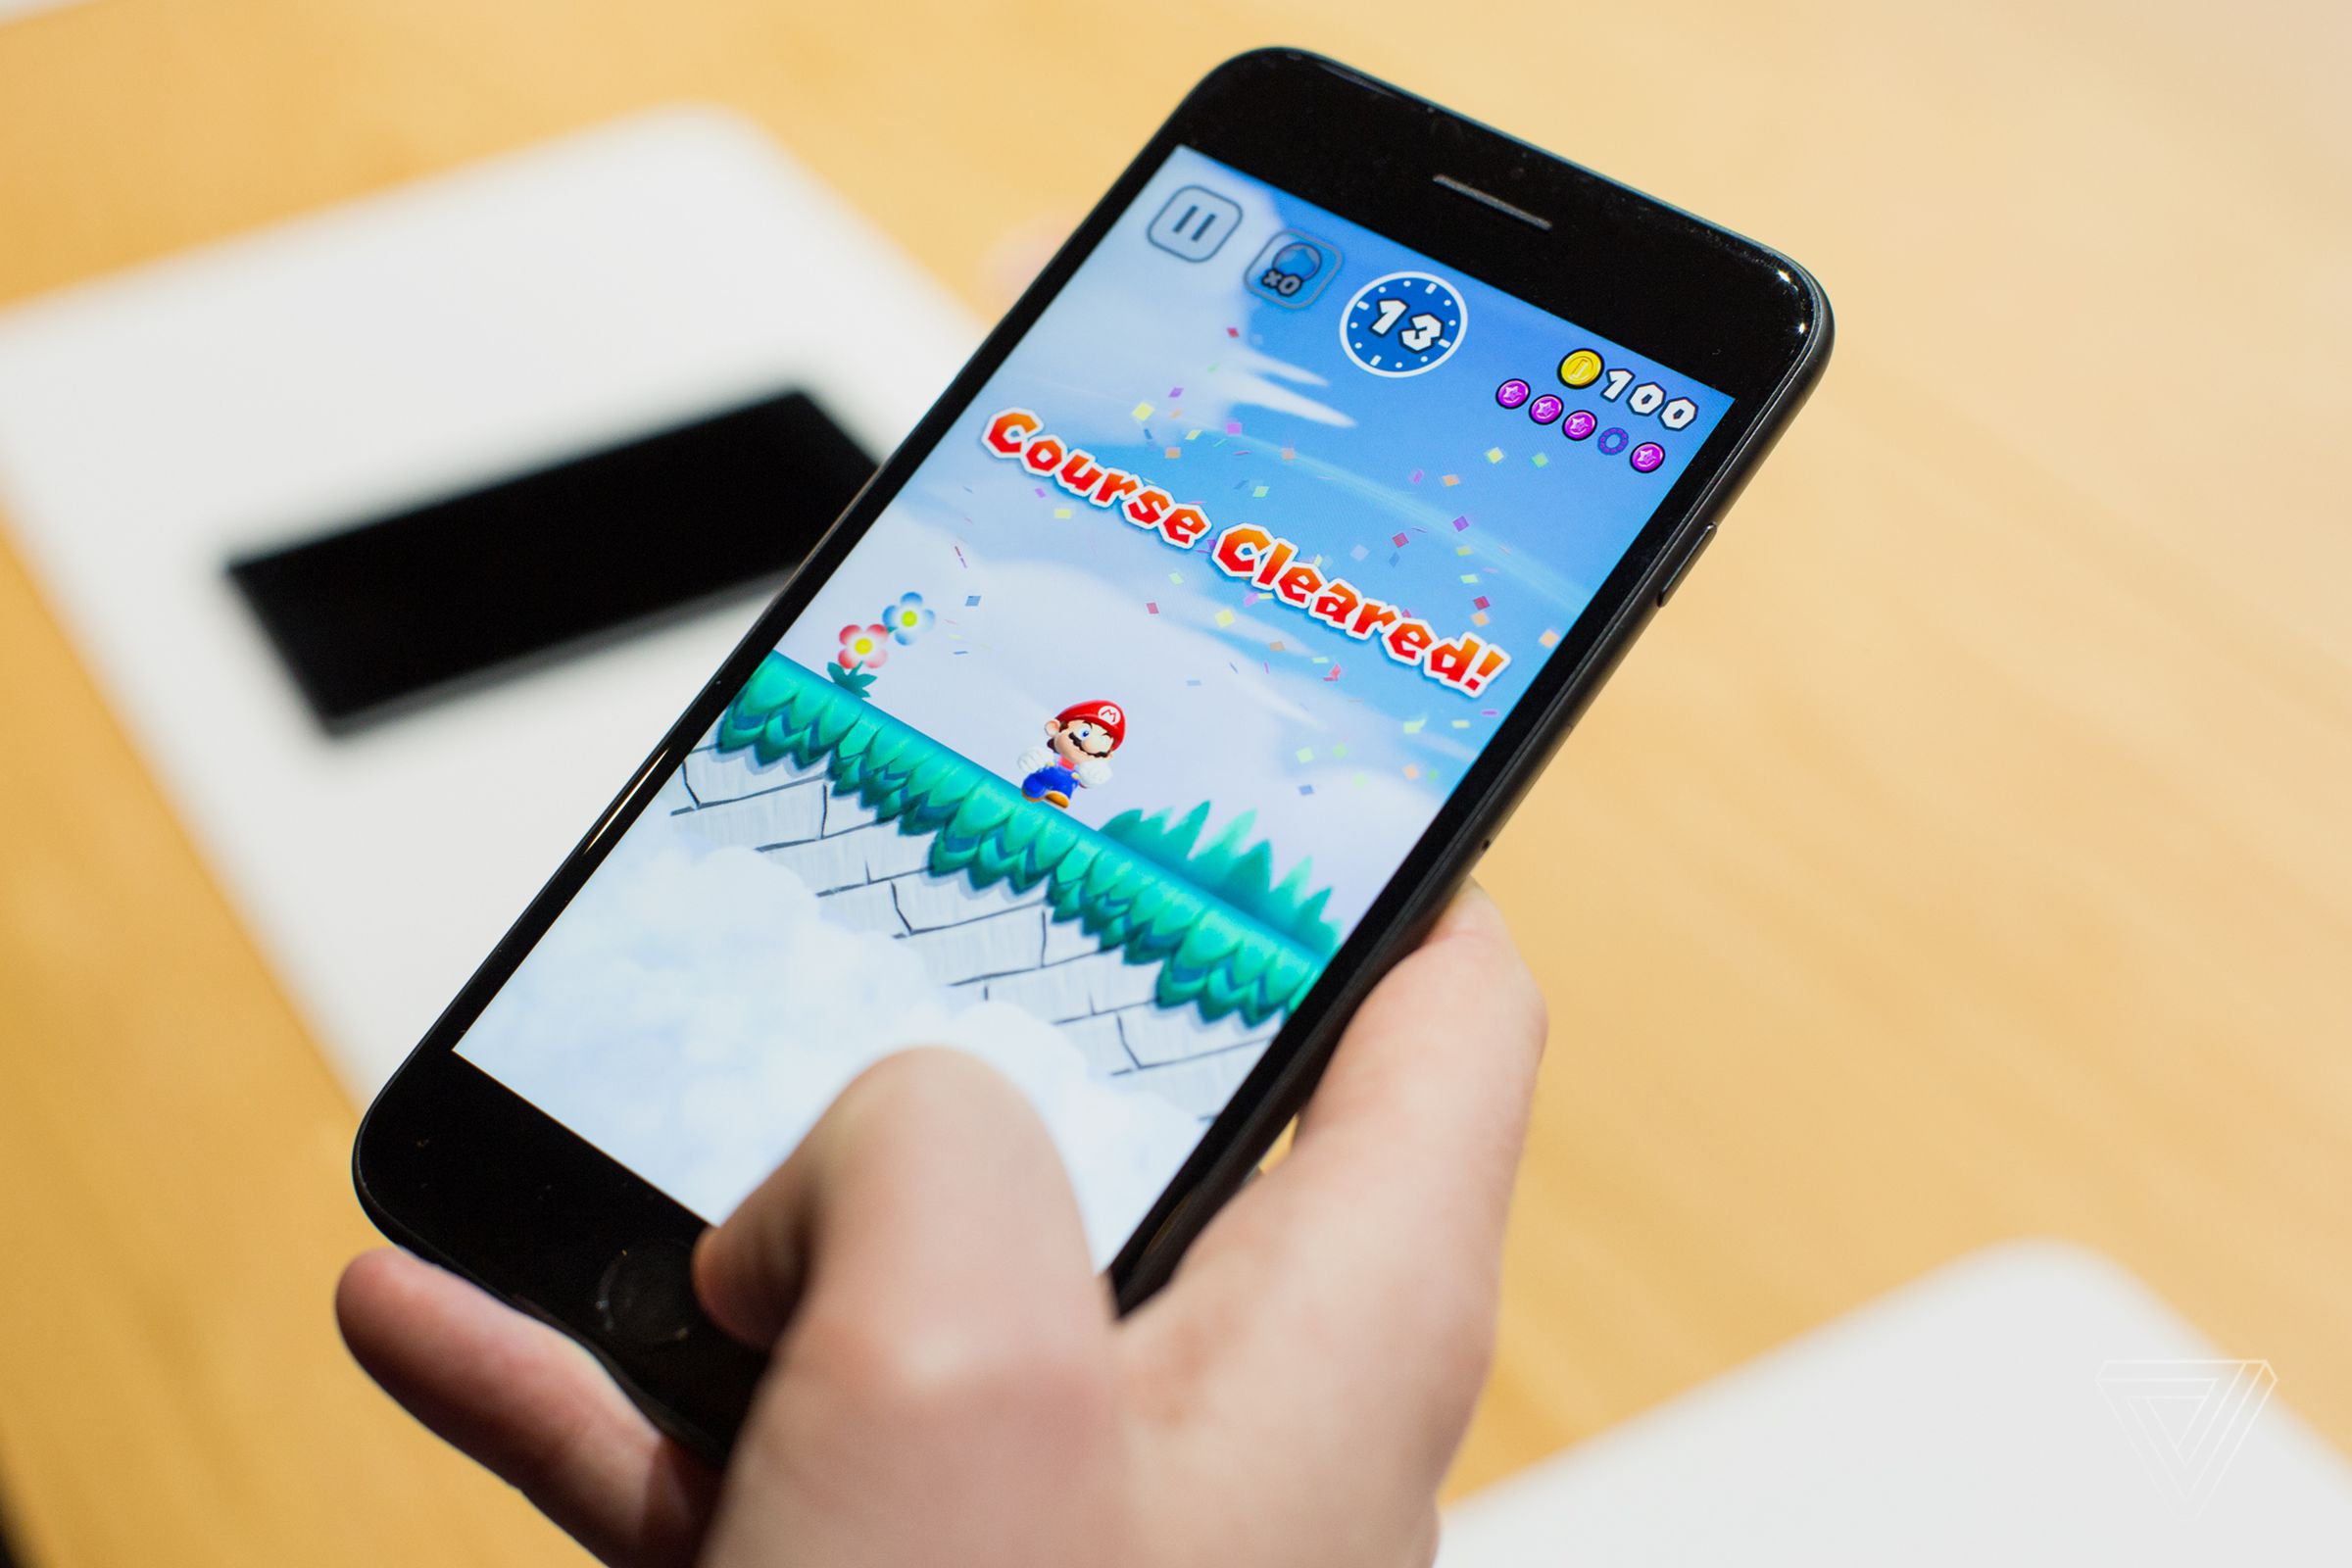 Super Mario Run was downloaded 40 million times in its first four days. 